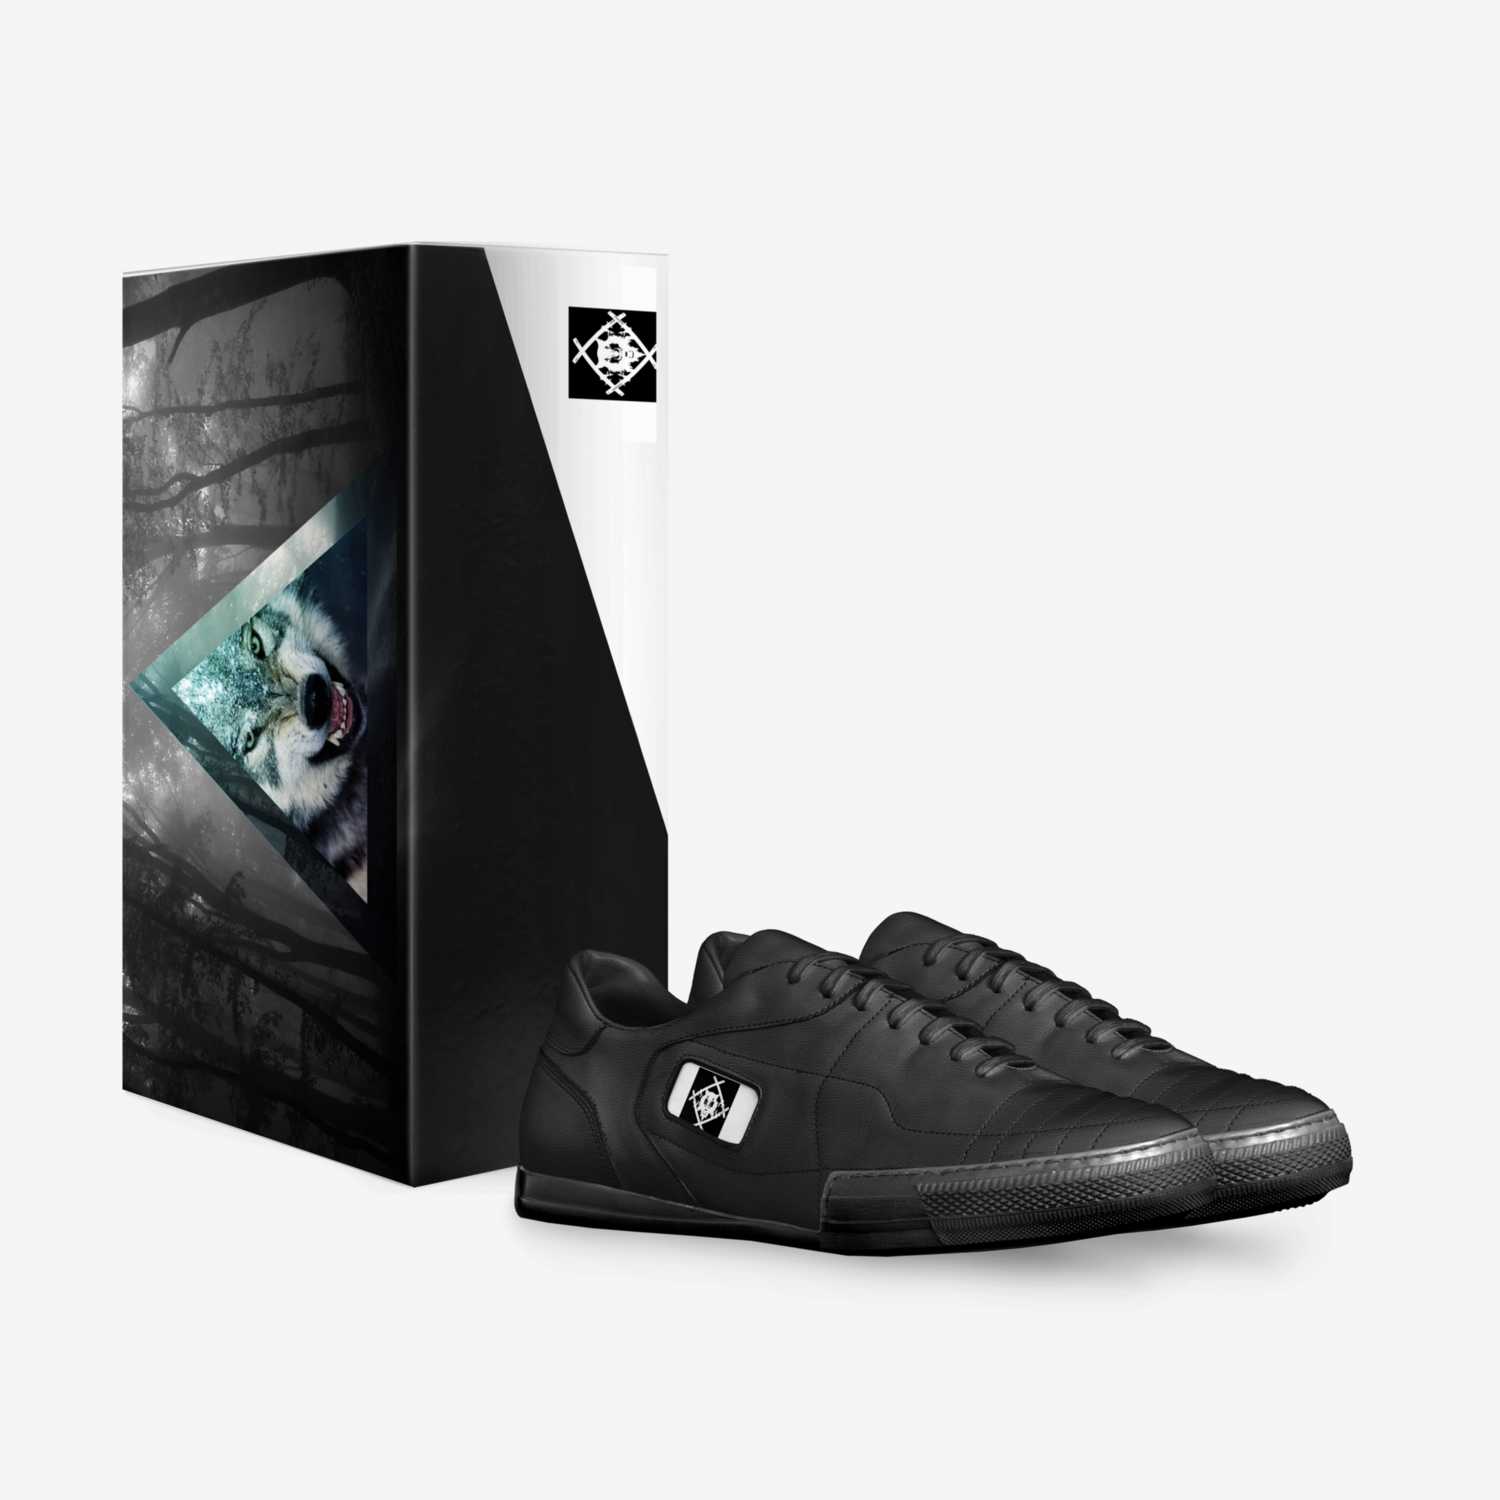 Xavier w1 custom made in Italy shoes by Justin Rico | Box view